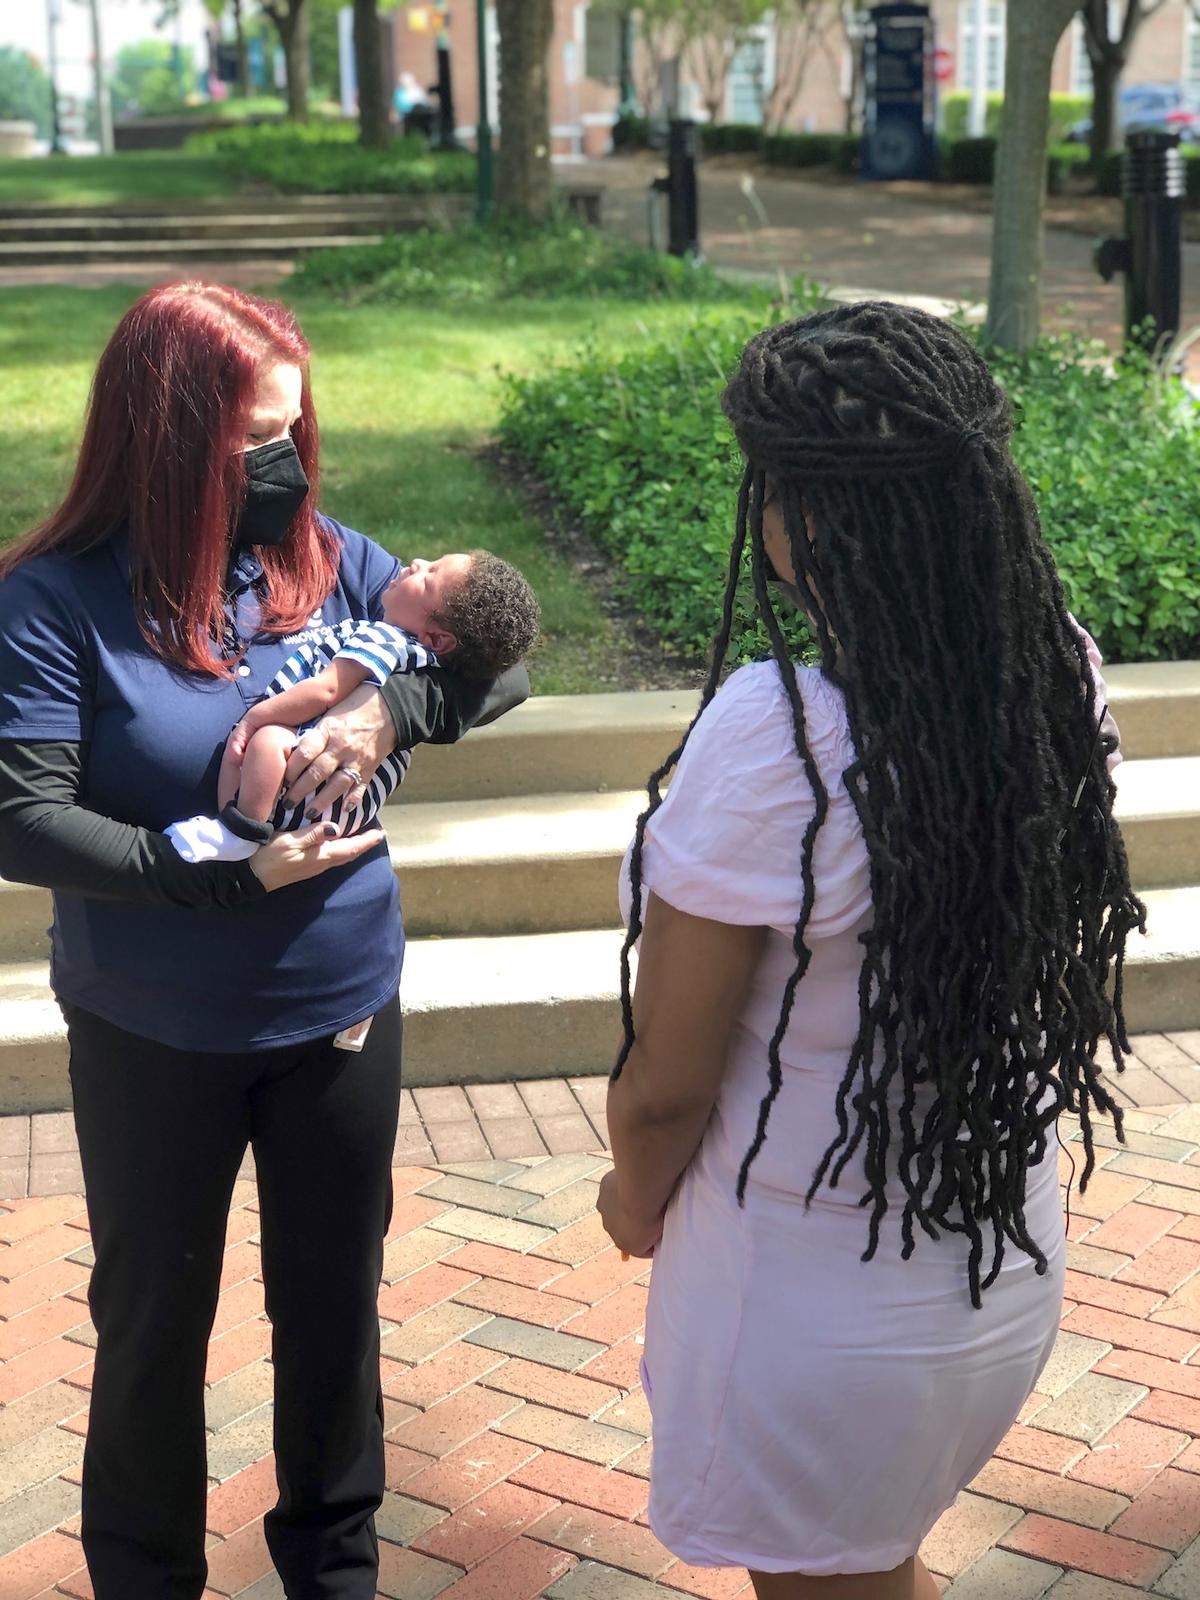 Union County dispatcher Keri Michaels meets Samantha Lockhart and her baby. (Courtesy of <a href="https://www.unioncountync.gov/">Union County Government</a>)